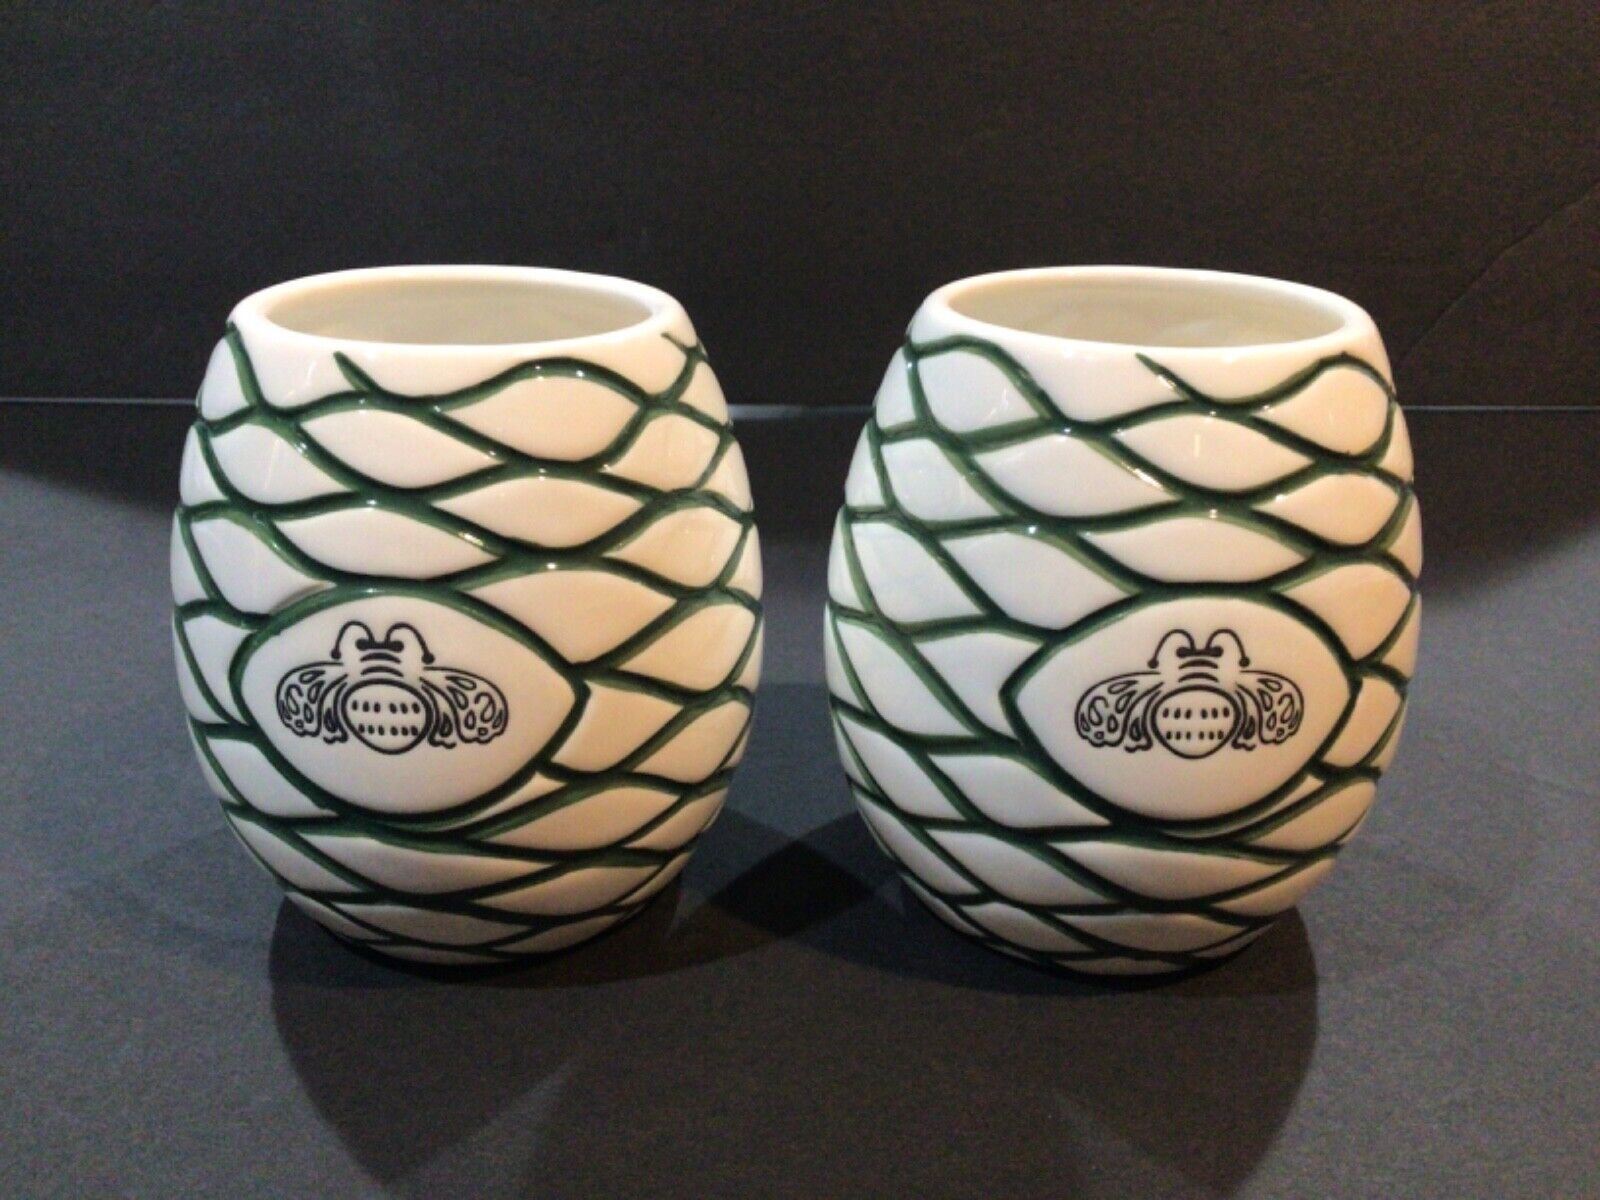 2 Patron Tequila Bee Hive Agave White and Green Ceramic Tiki Mug/Cups